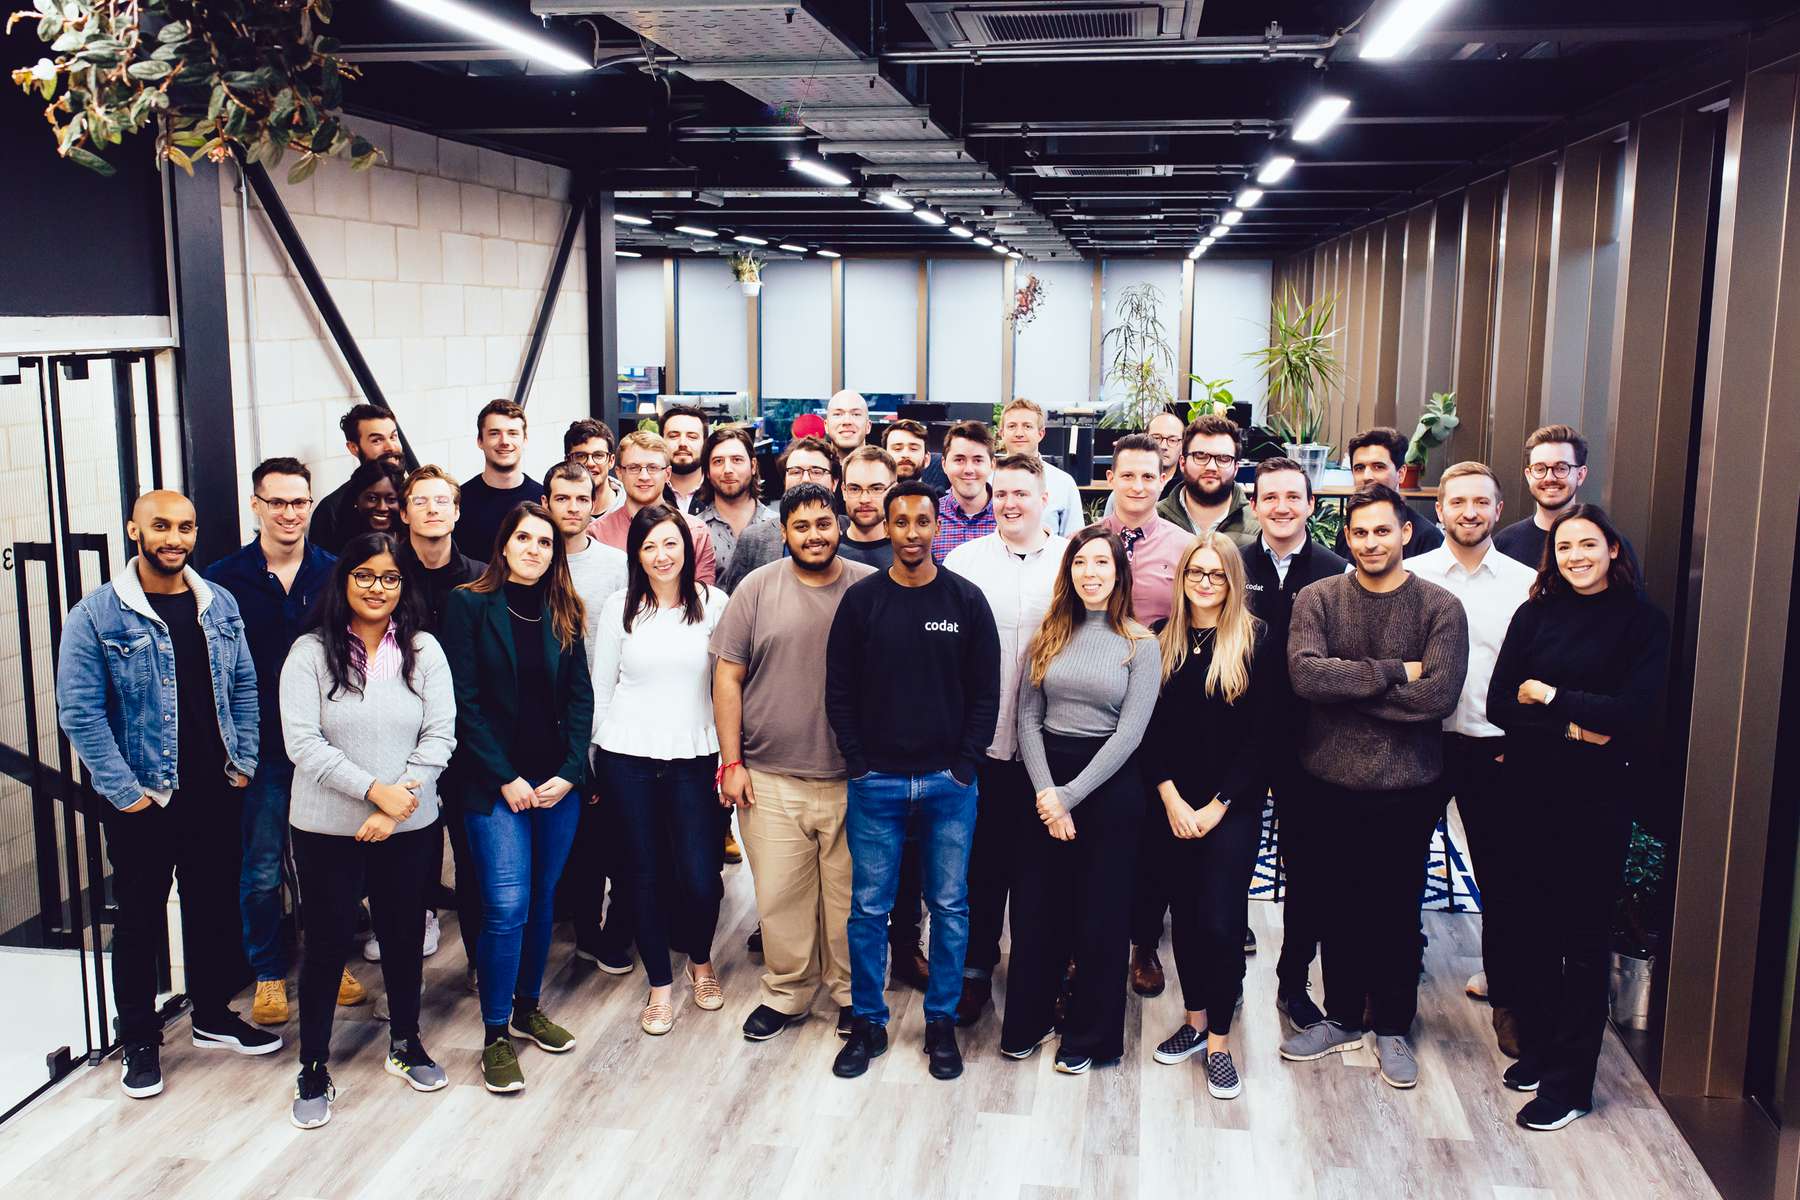 The Codat team at their London office